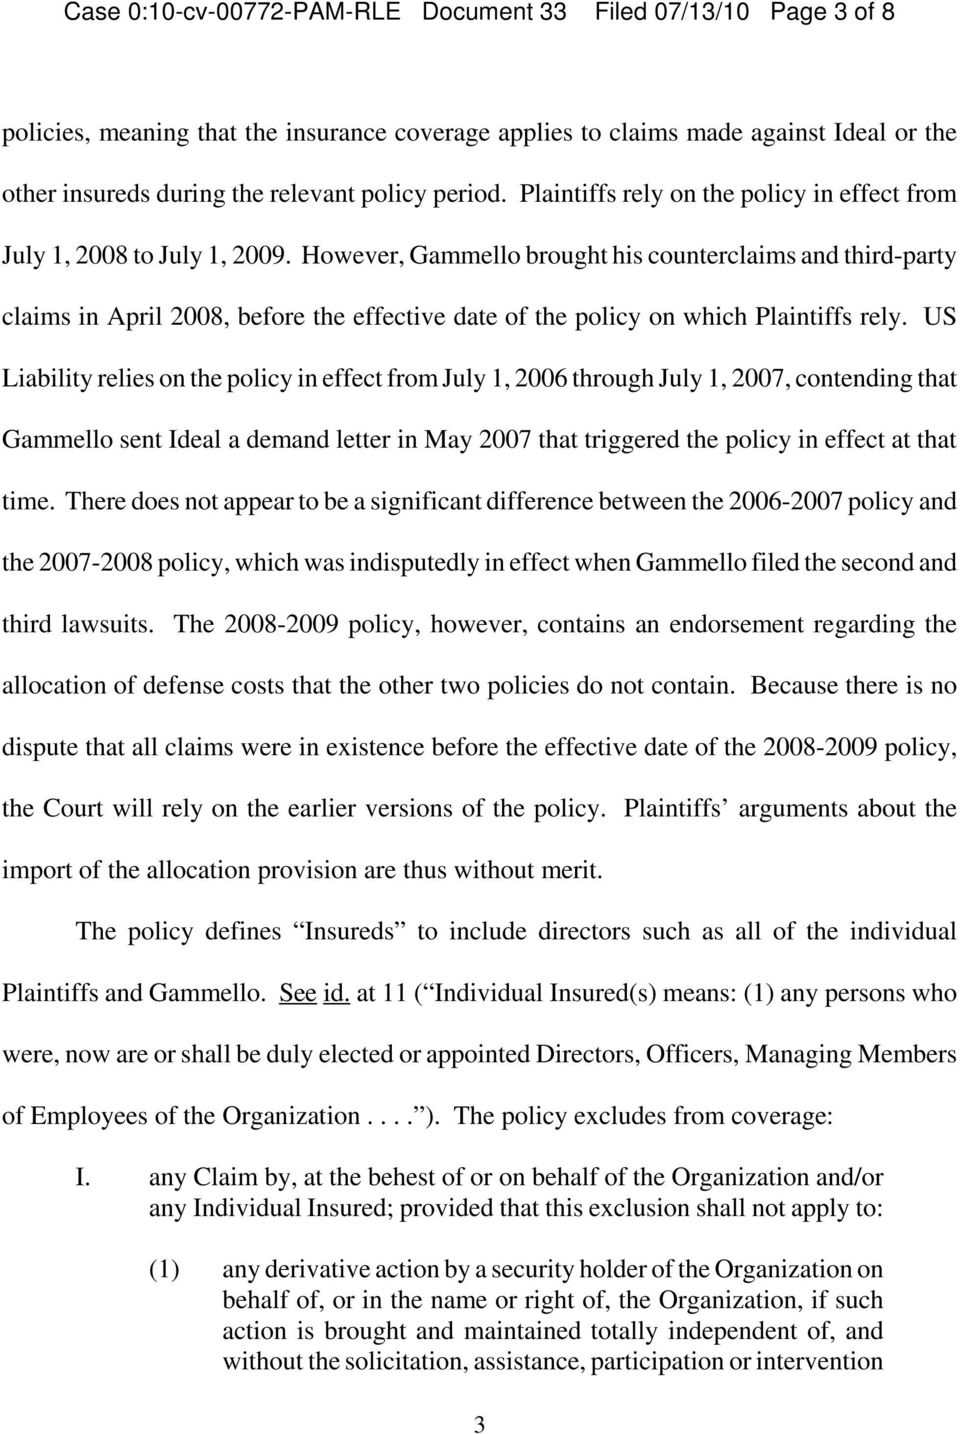 However, Gammello brought his counterclaims and third-party claims in April 2008, before the effective date of the policy on which Plaintiffs rely.